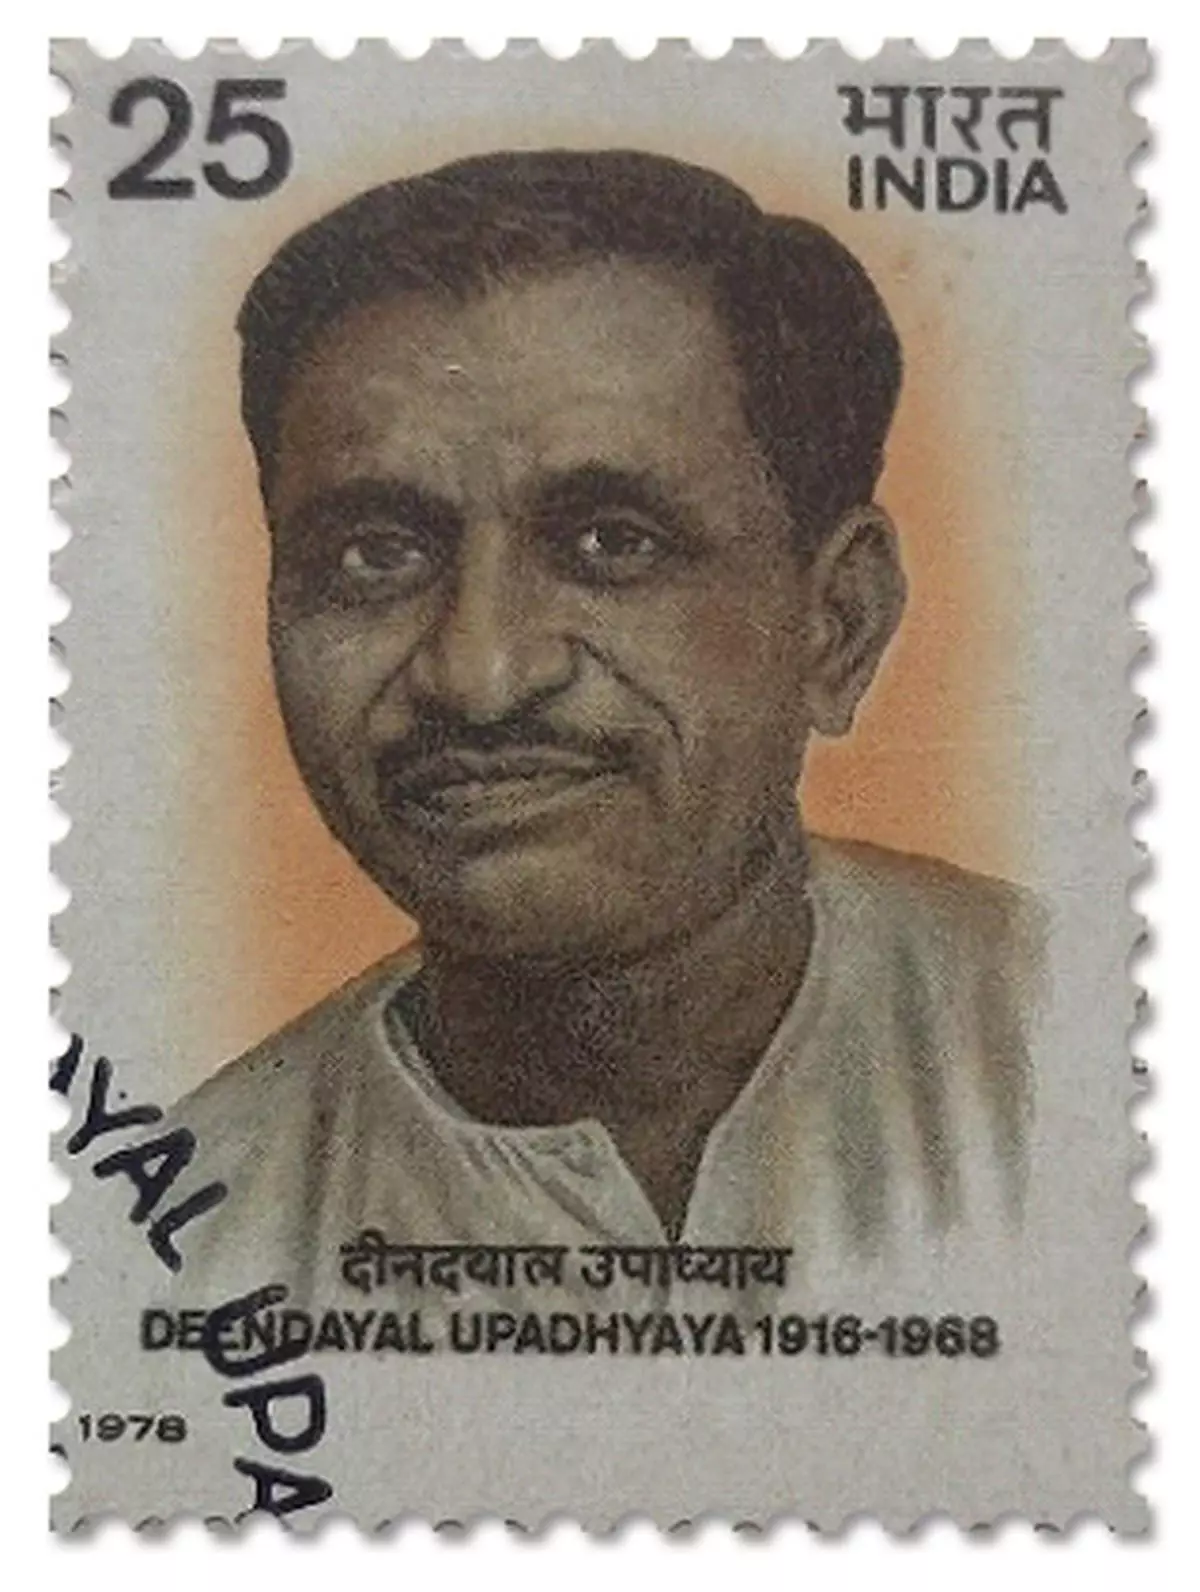 How is the Sangh Parivar stamping its mark on Indian philately